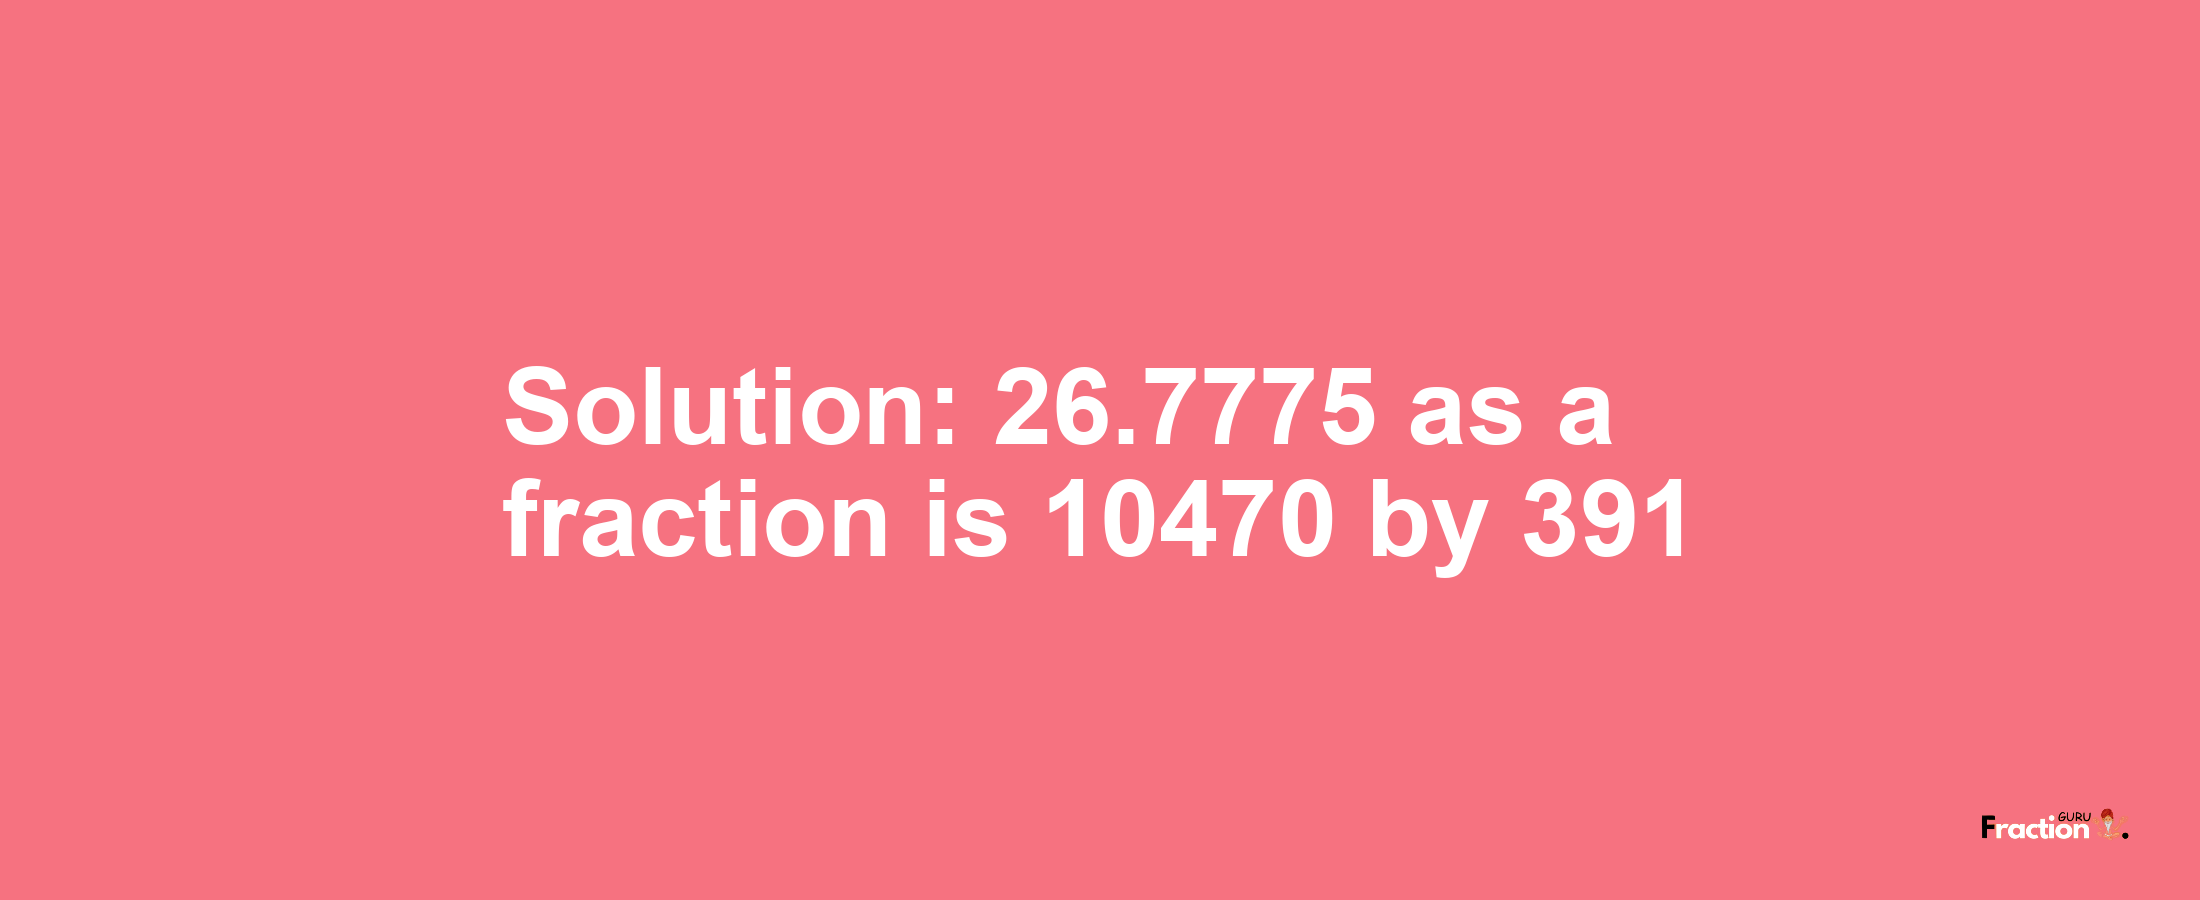 Solution:26.7775 as a fraction is 10470/391